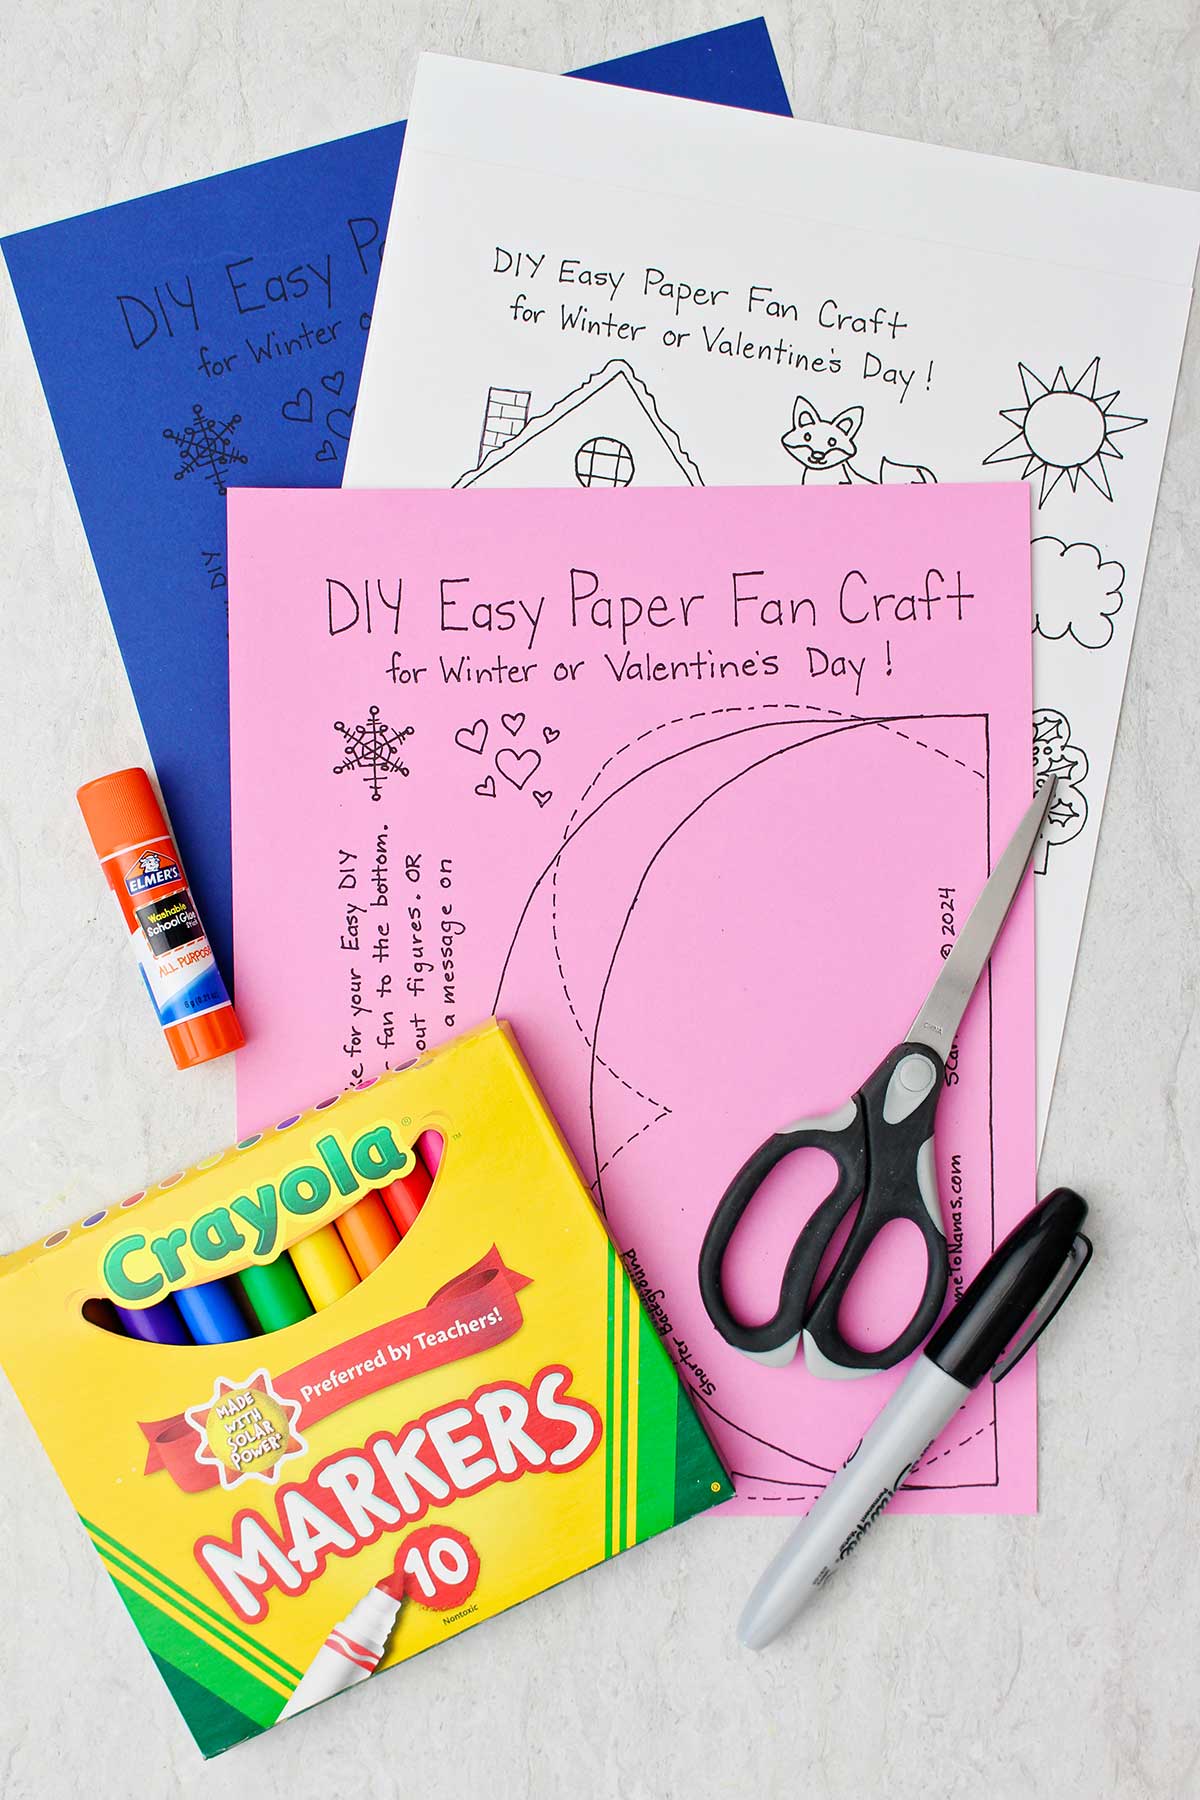 Printouts for winter and Valentine's Day Easy Paper Fan Crafts, a box of markers, glue stick, scissors and Sharpie.